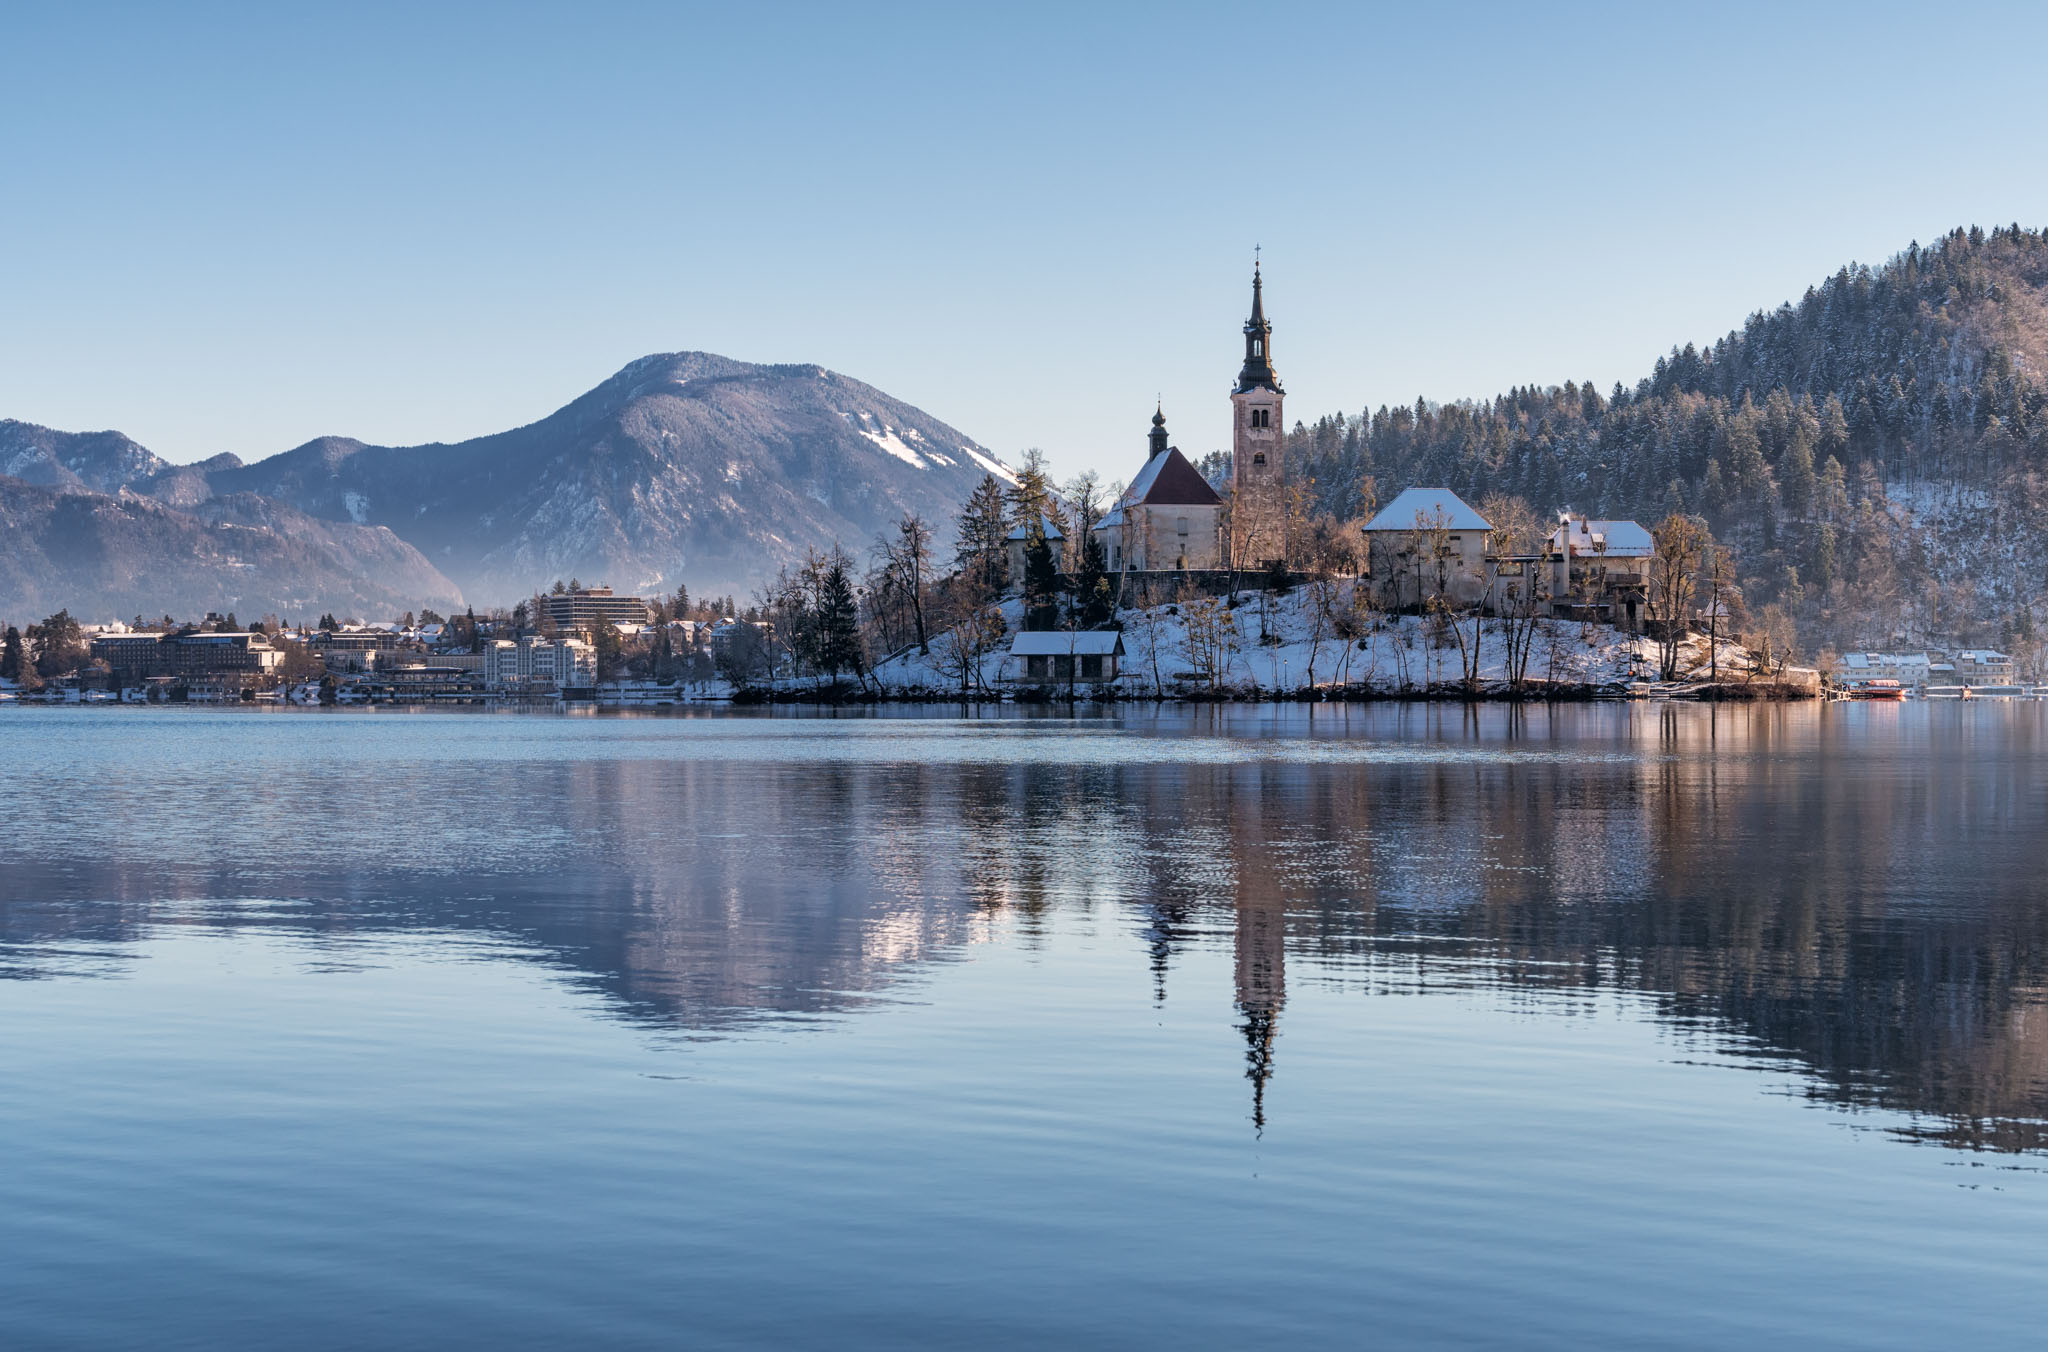 Architecture House Church Building Lake Bled Slovenia Island Mountains Winter Snow Trees Lake Forest 2048x1352